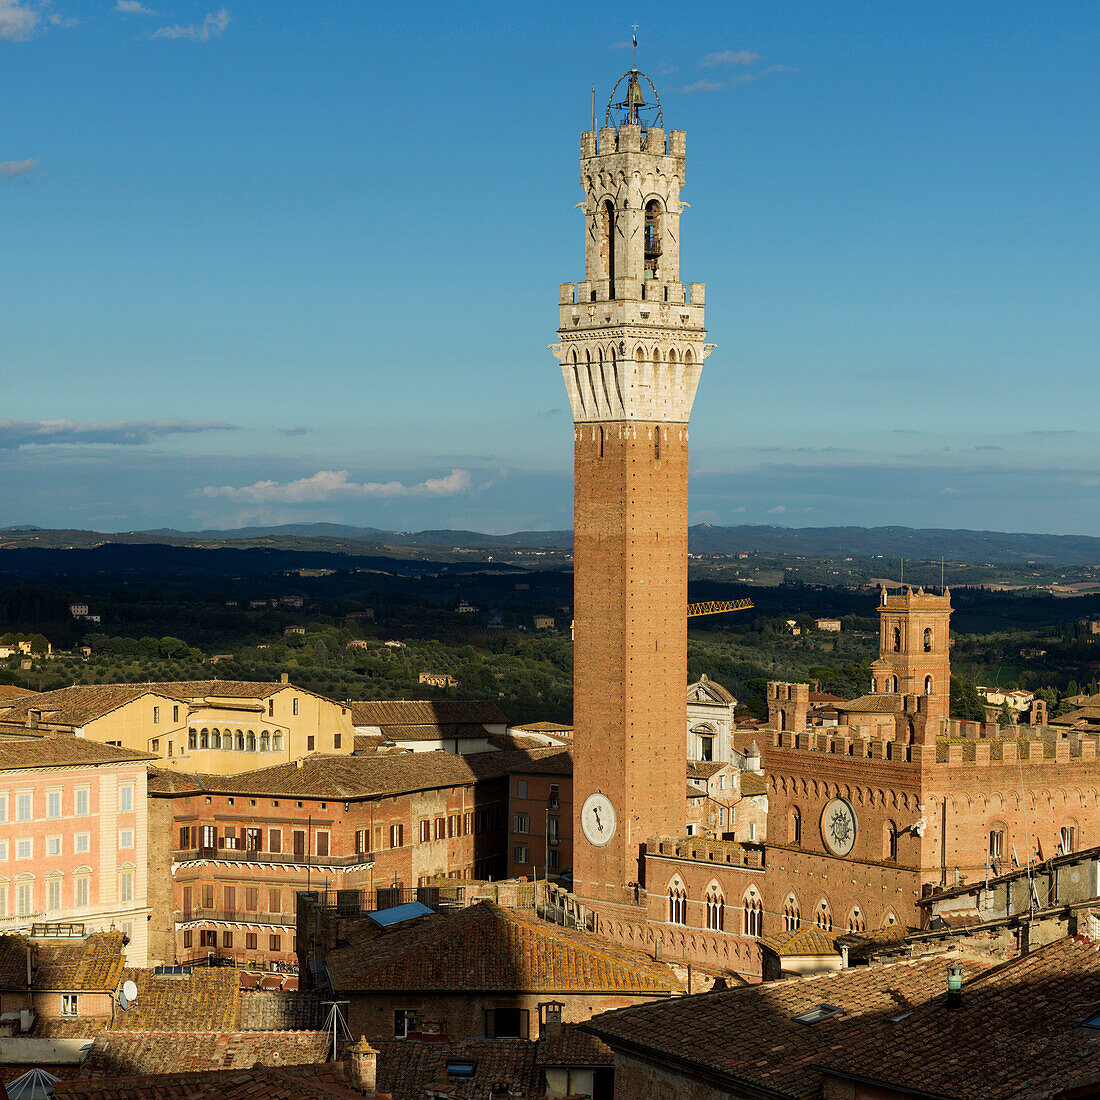 Mangia Tower and Campo Square, Siena, Italy